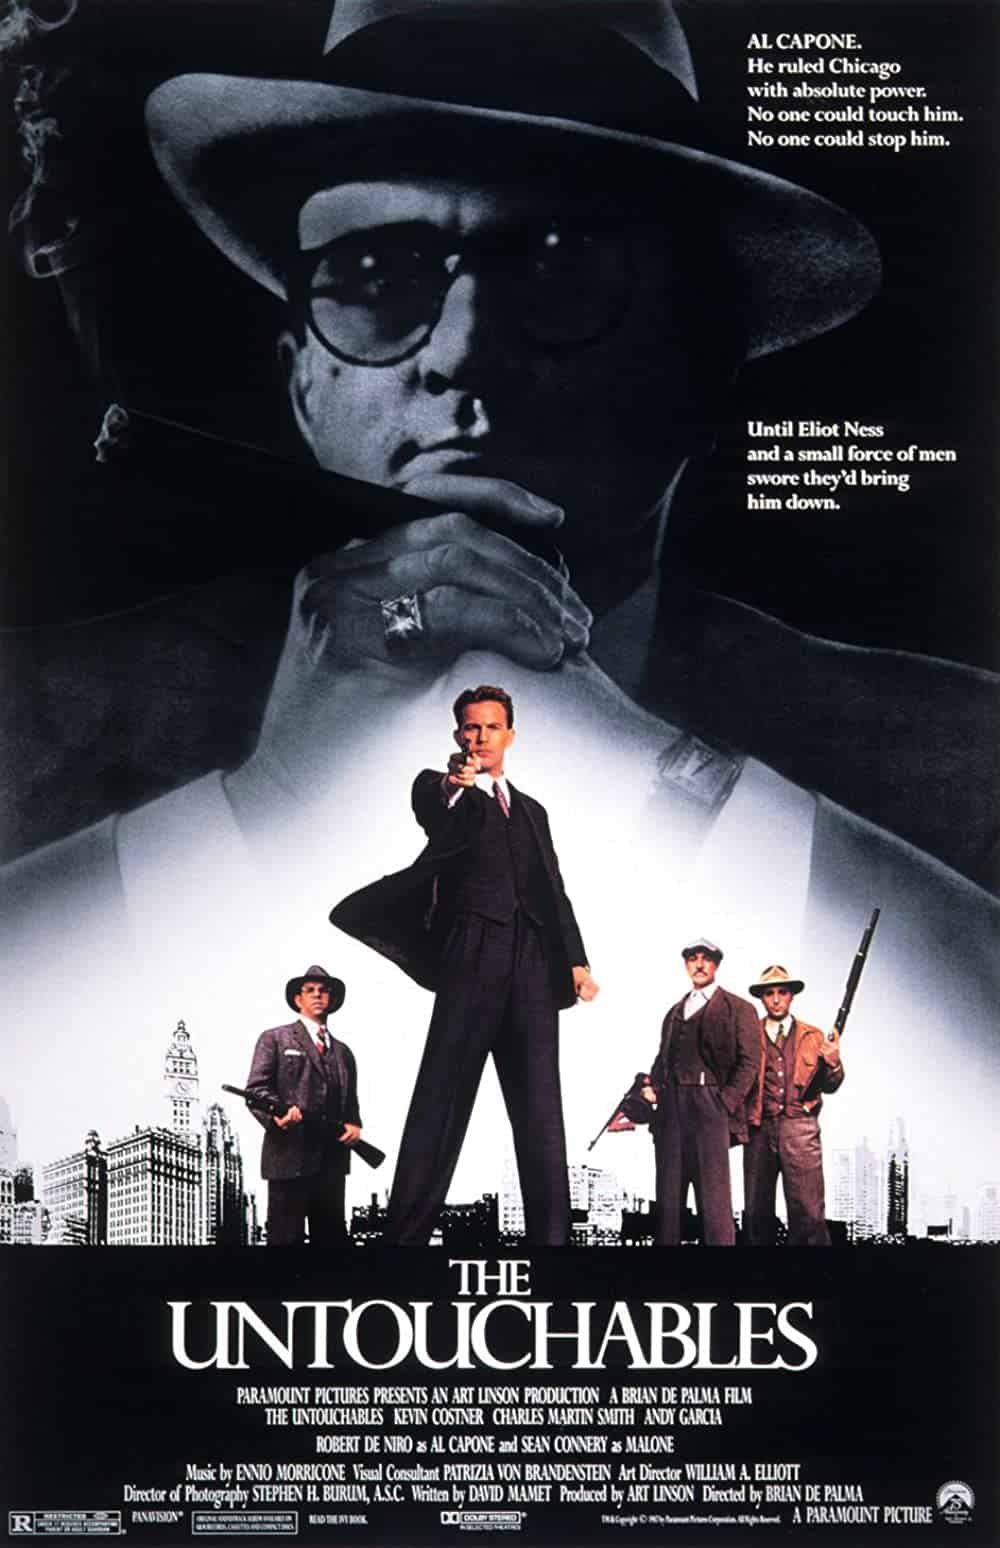 The Untouchables (1987) Best Chicago Movies to Add in Your Watchlist